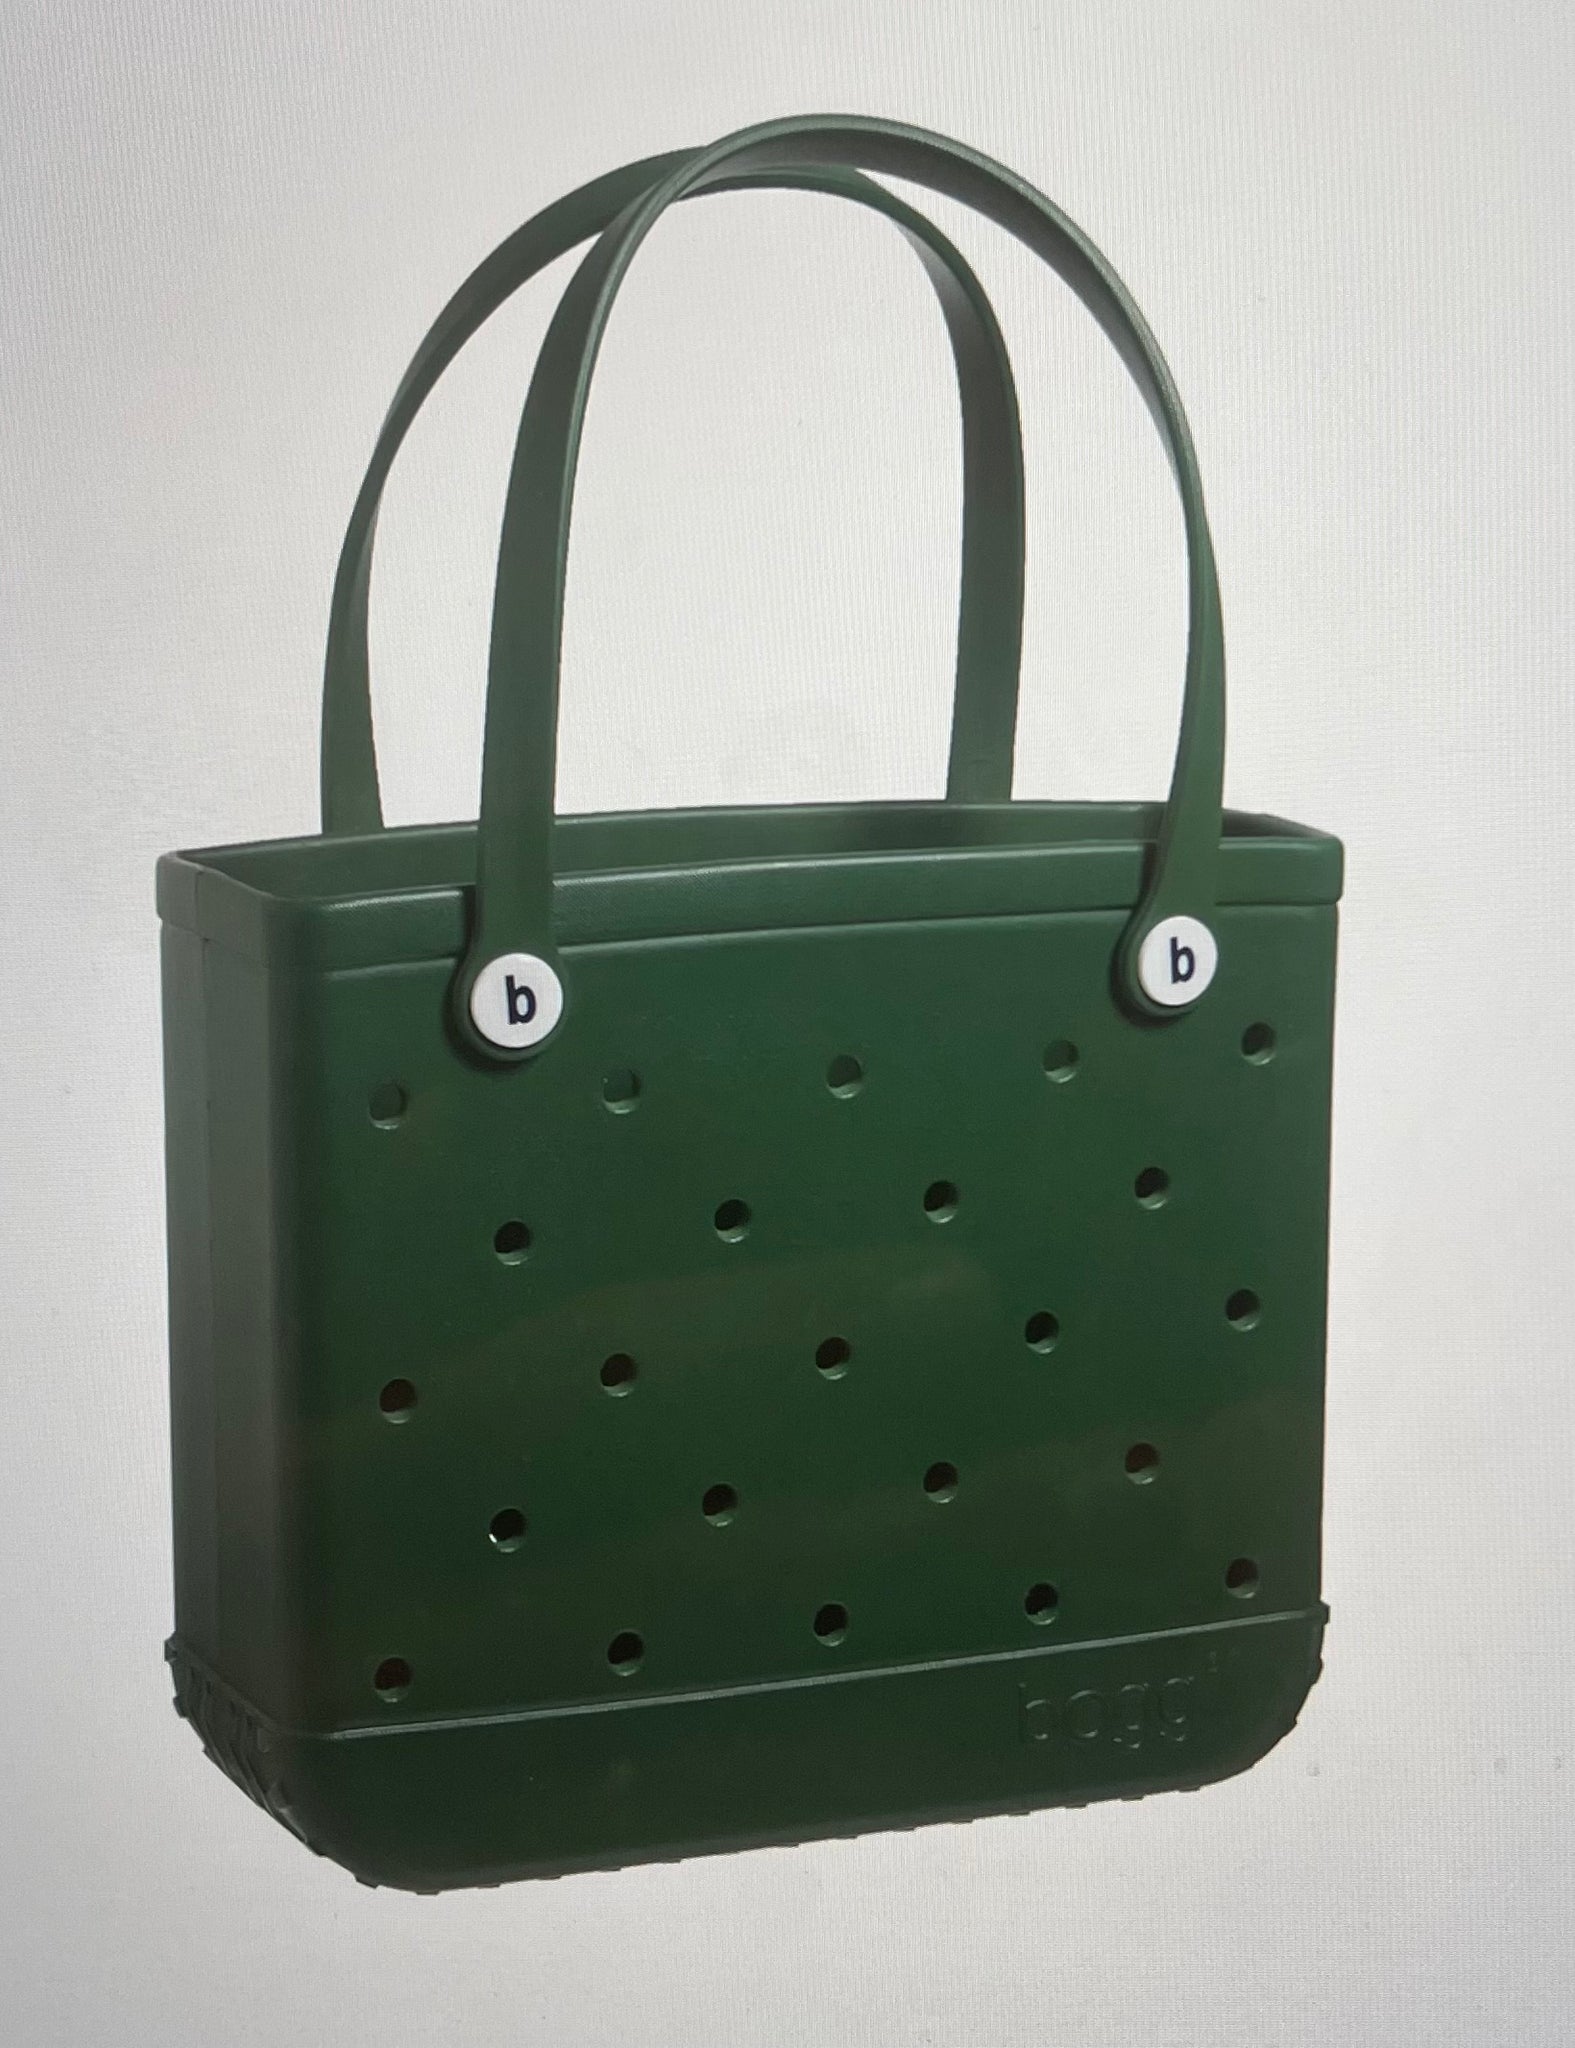 Bogg Bag - Did you know you can put your insert bags on